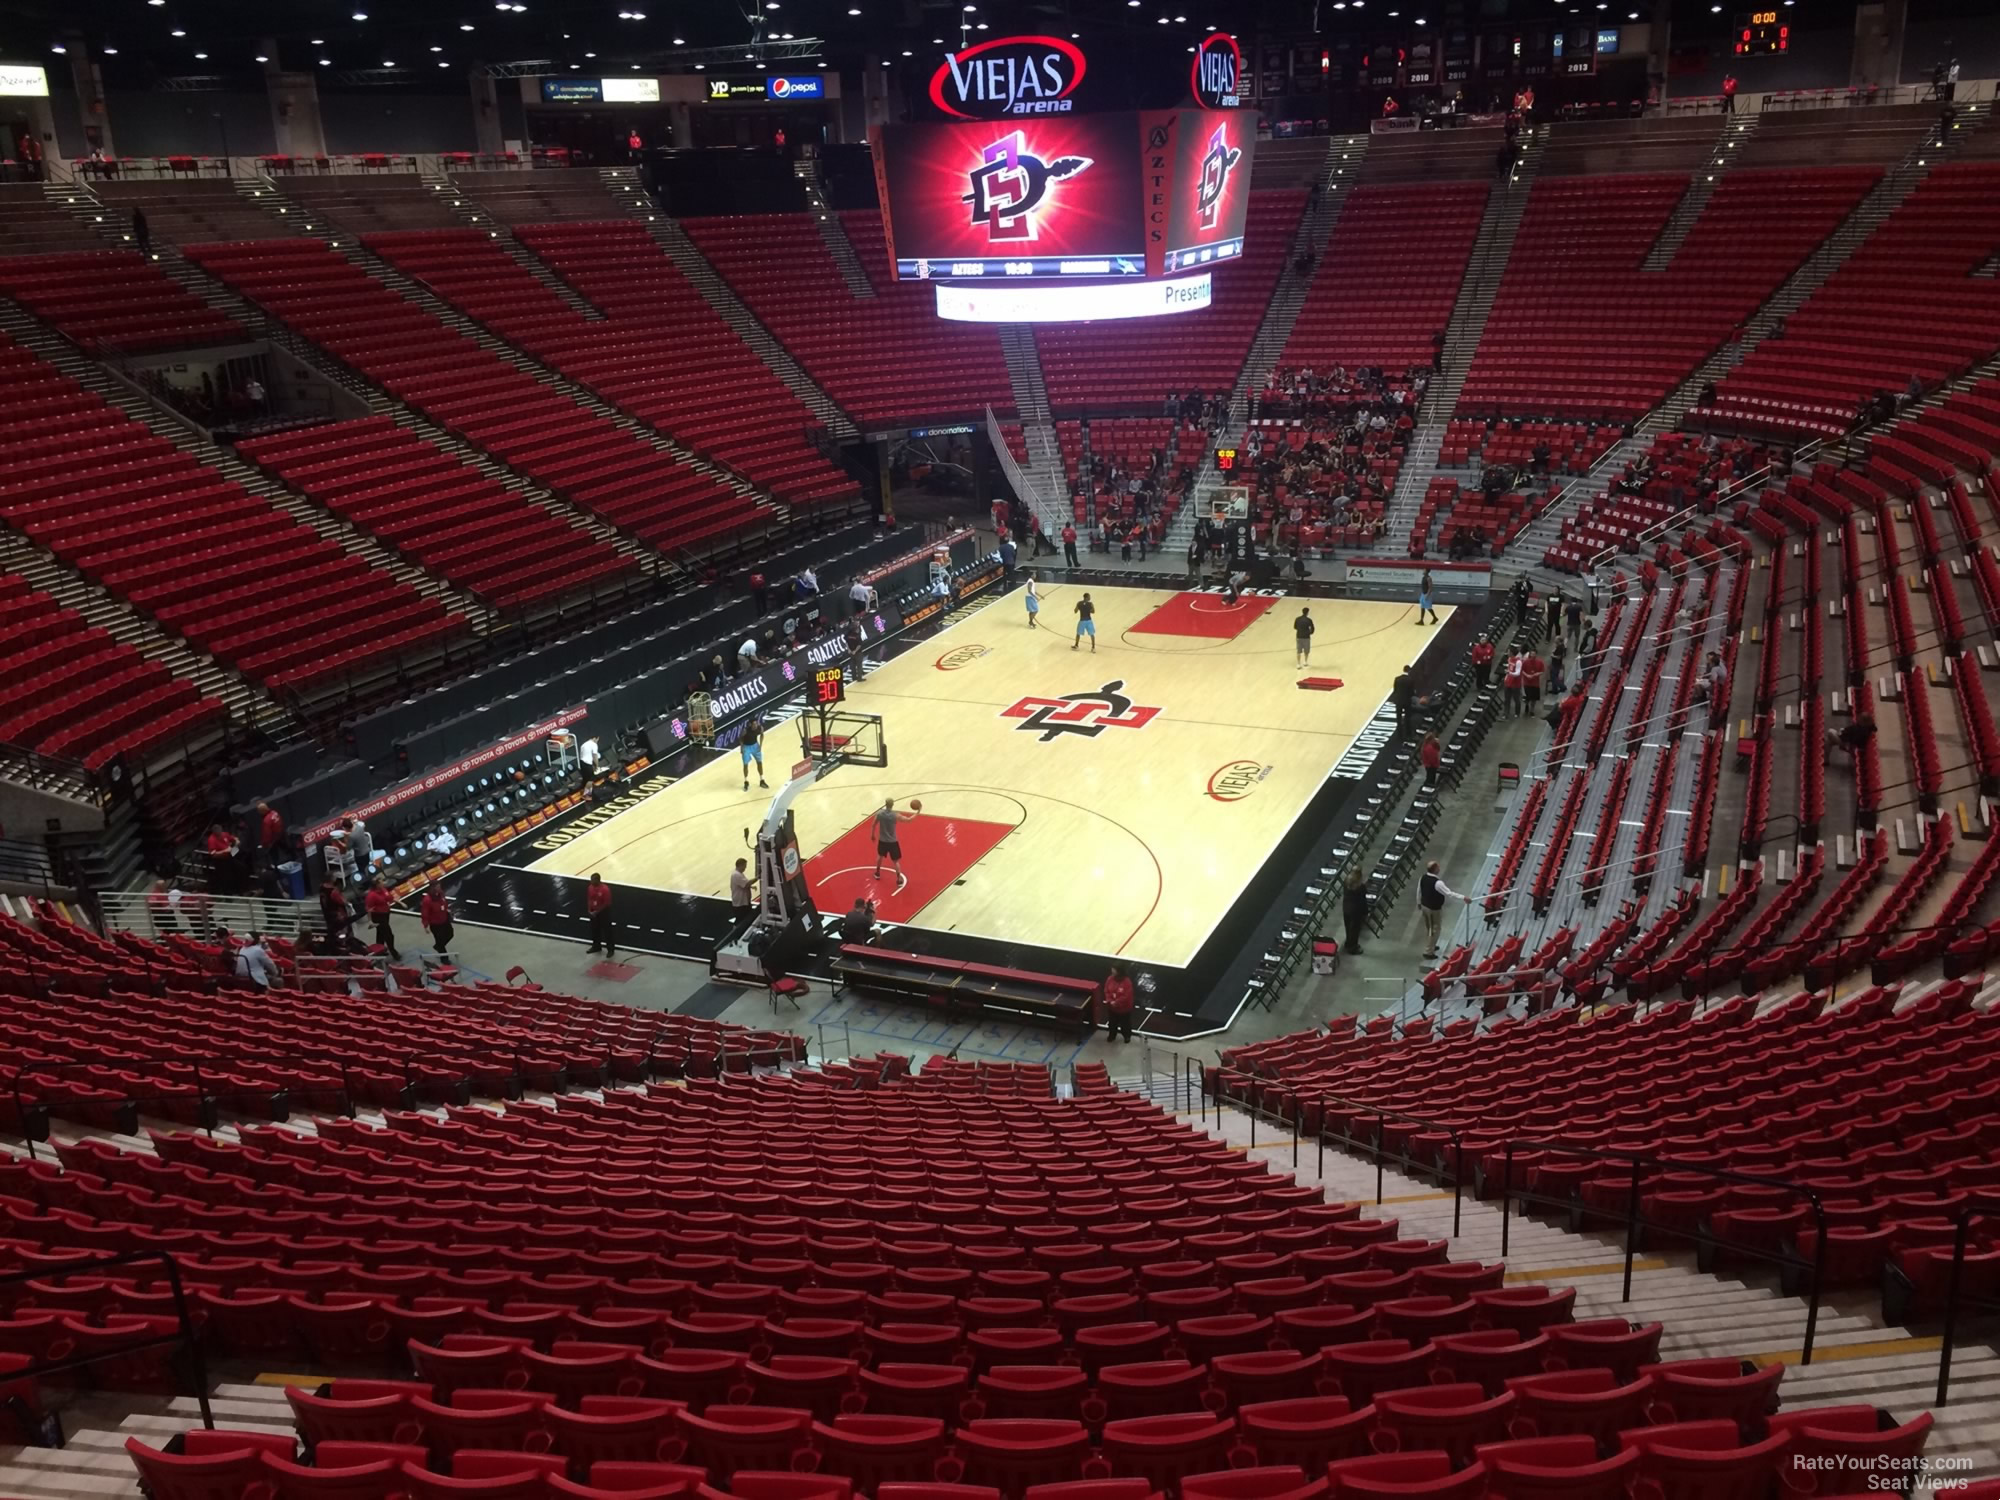 Viejas Arena Seating Chart View